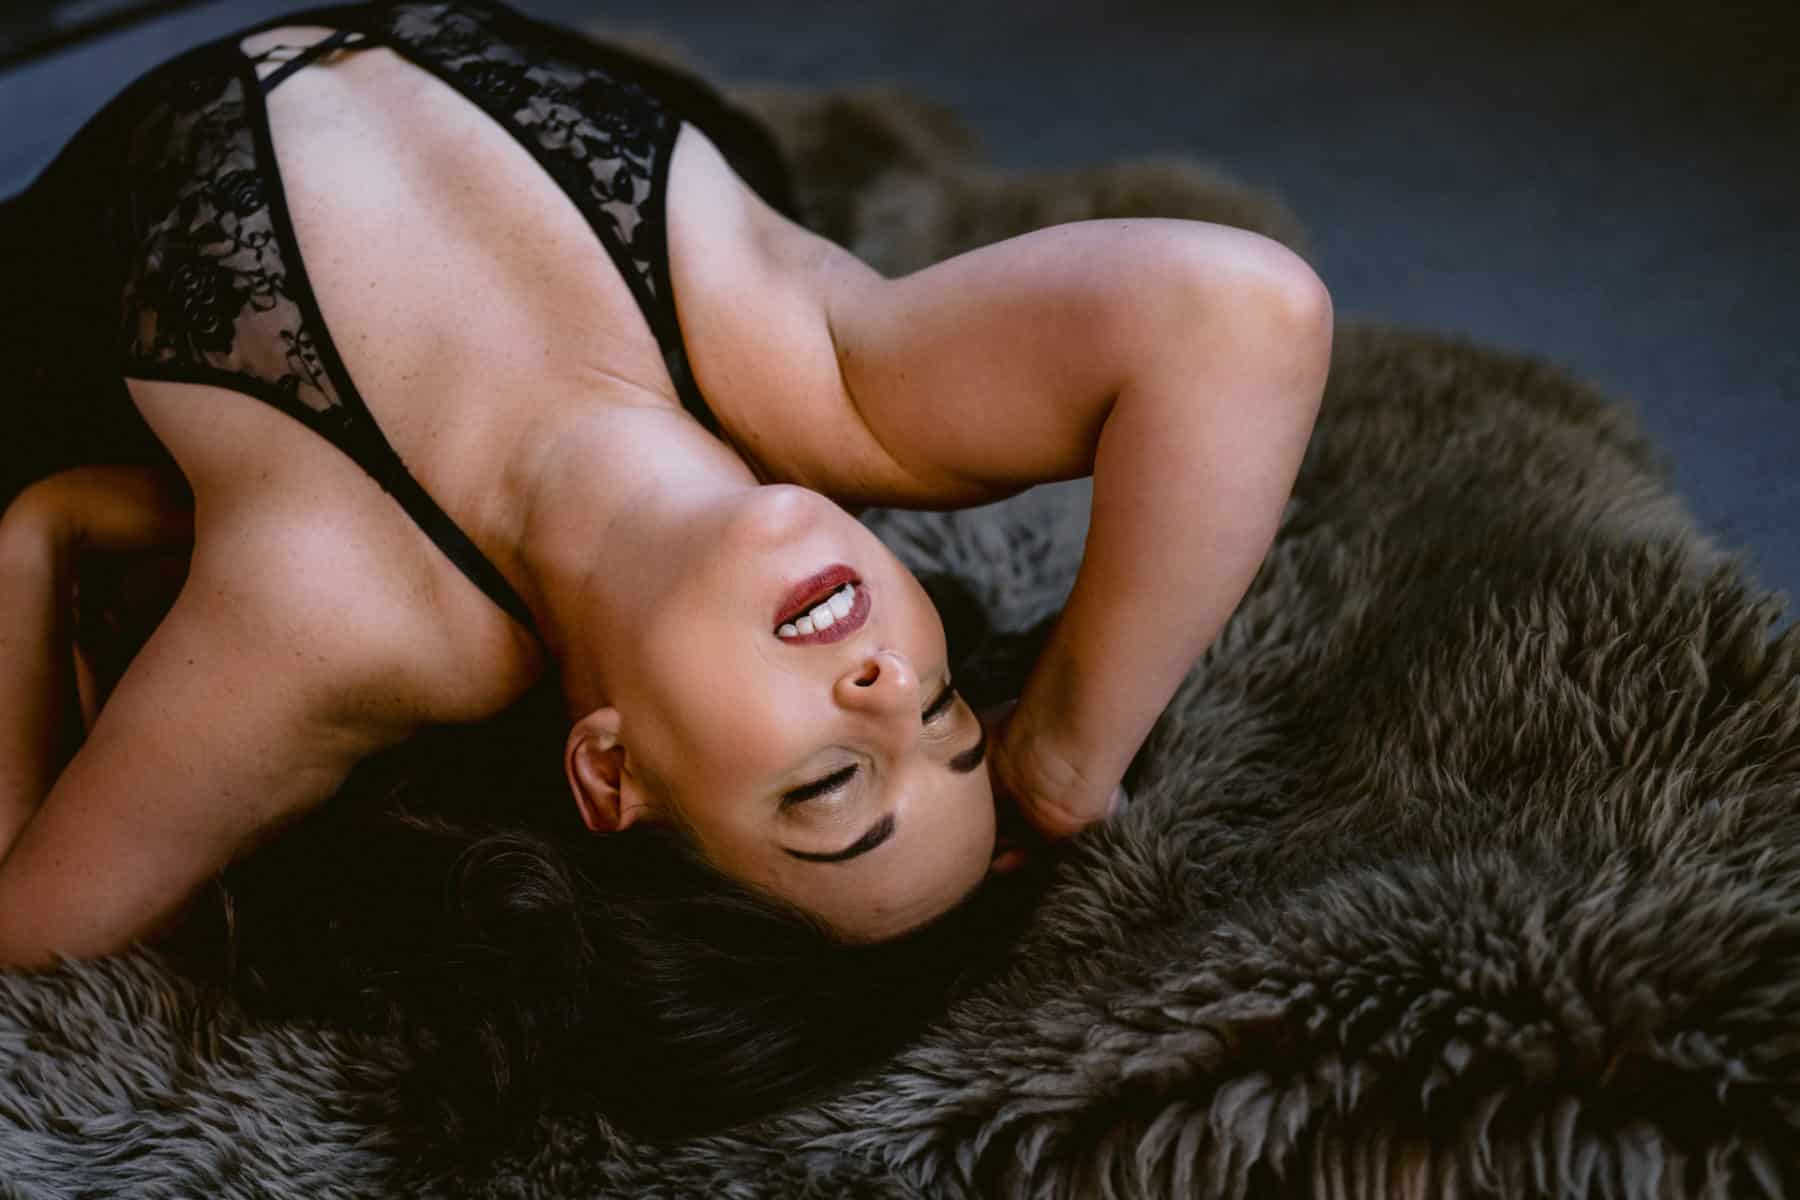 Boudoir style photo of woman arched back on the floor with her hand in her hair